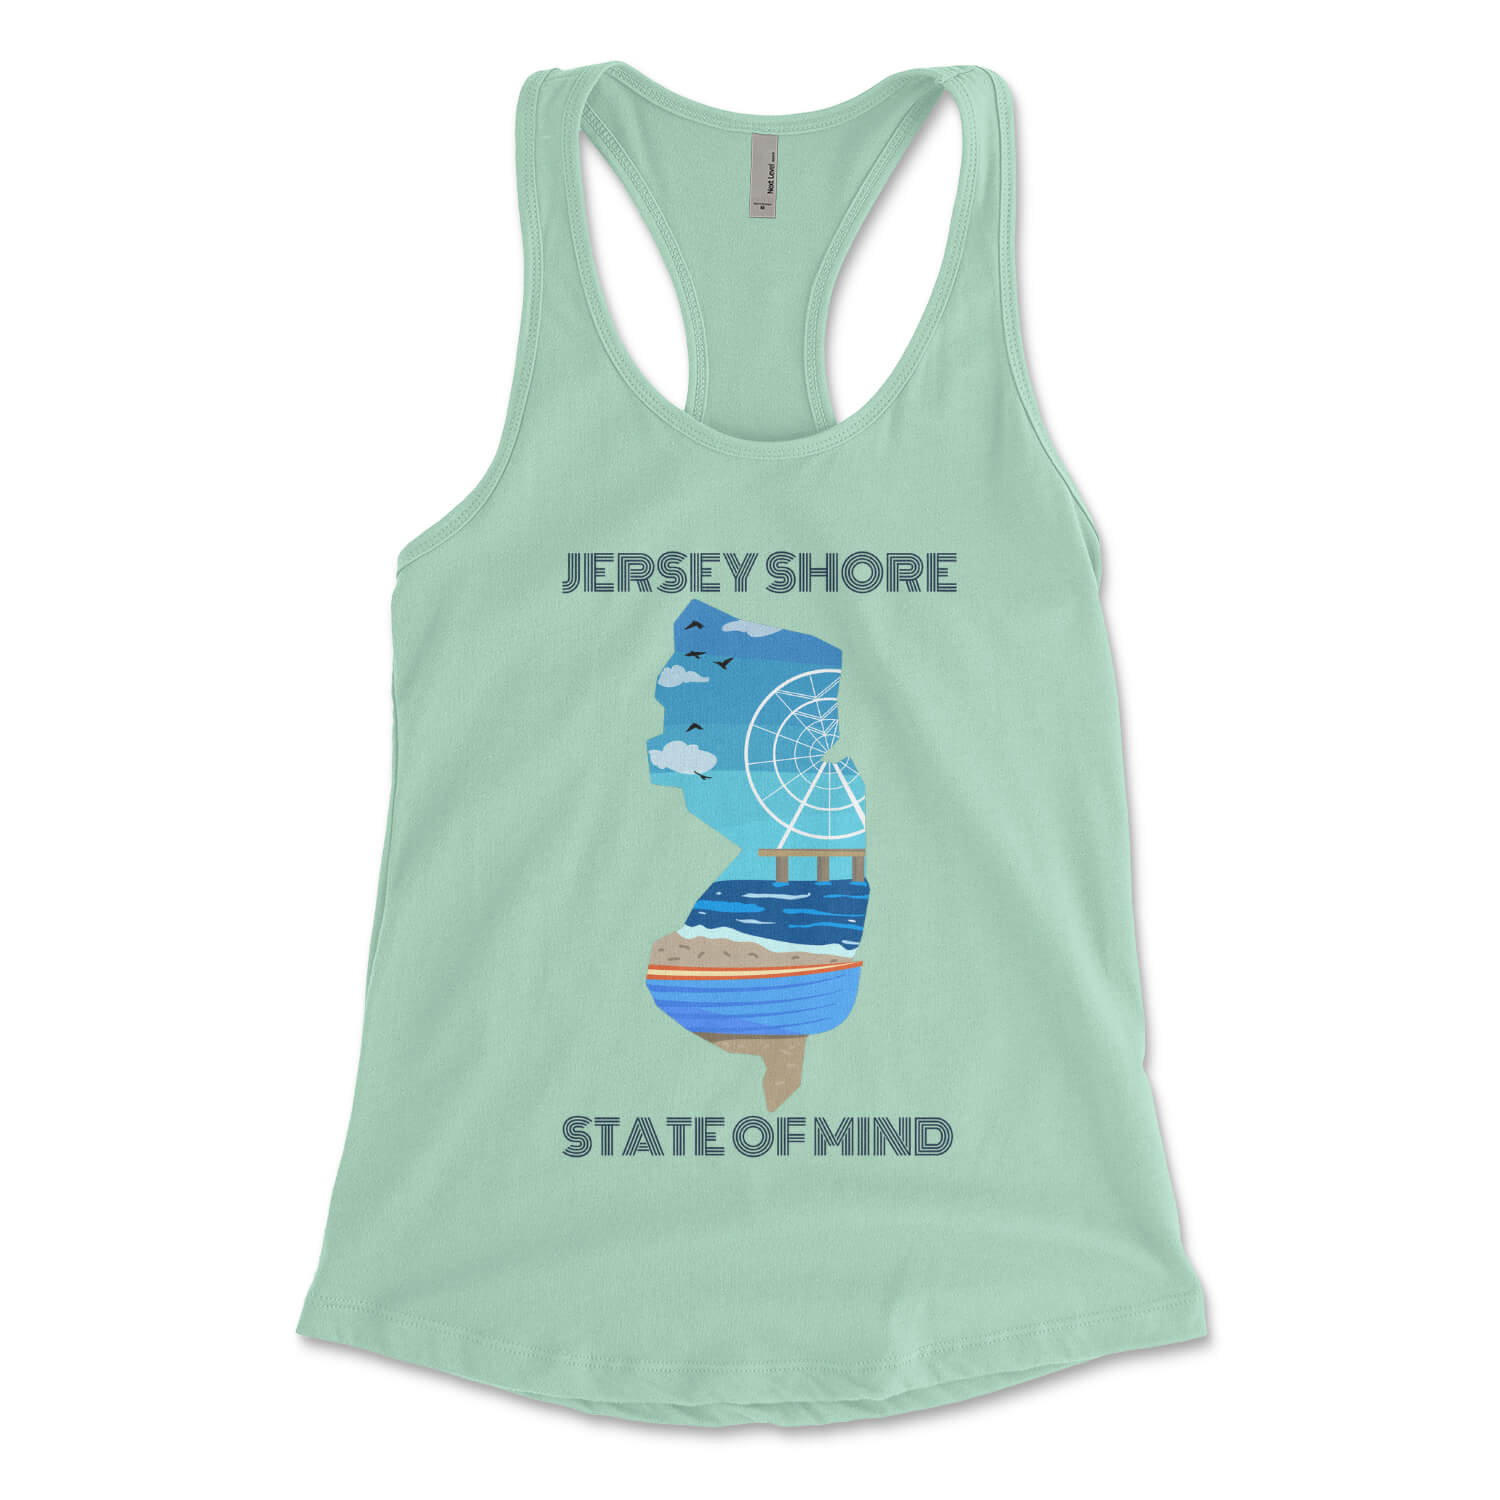 Jersey Shore state of mind mint green womens racerback tank top from Phillygoat